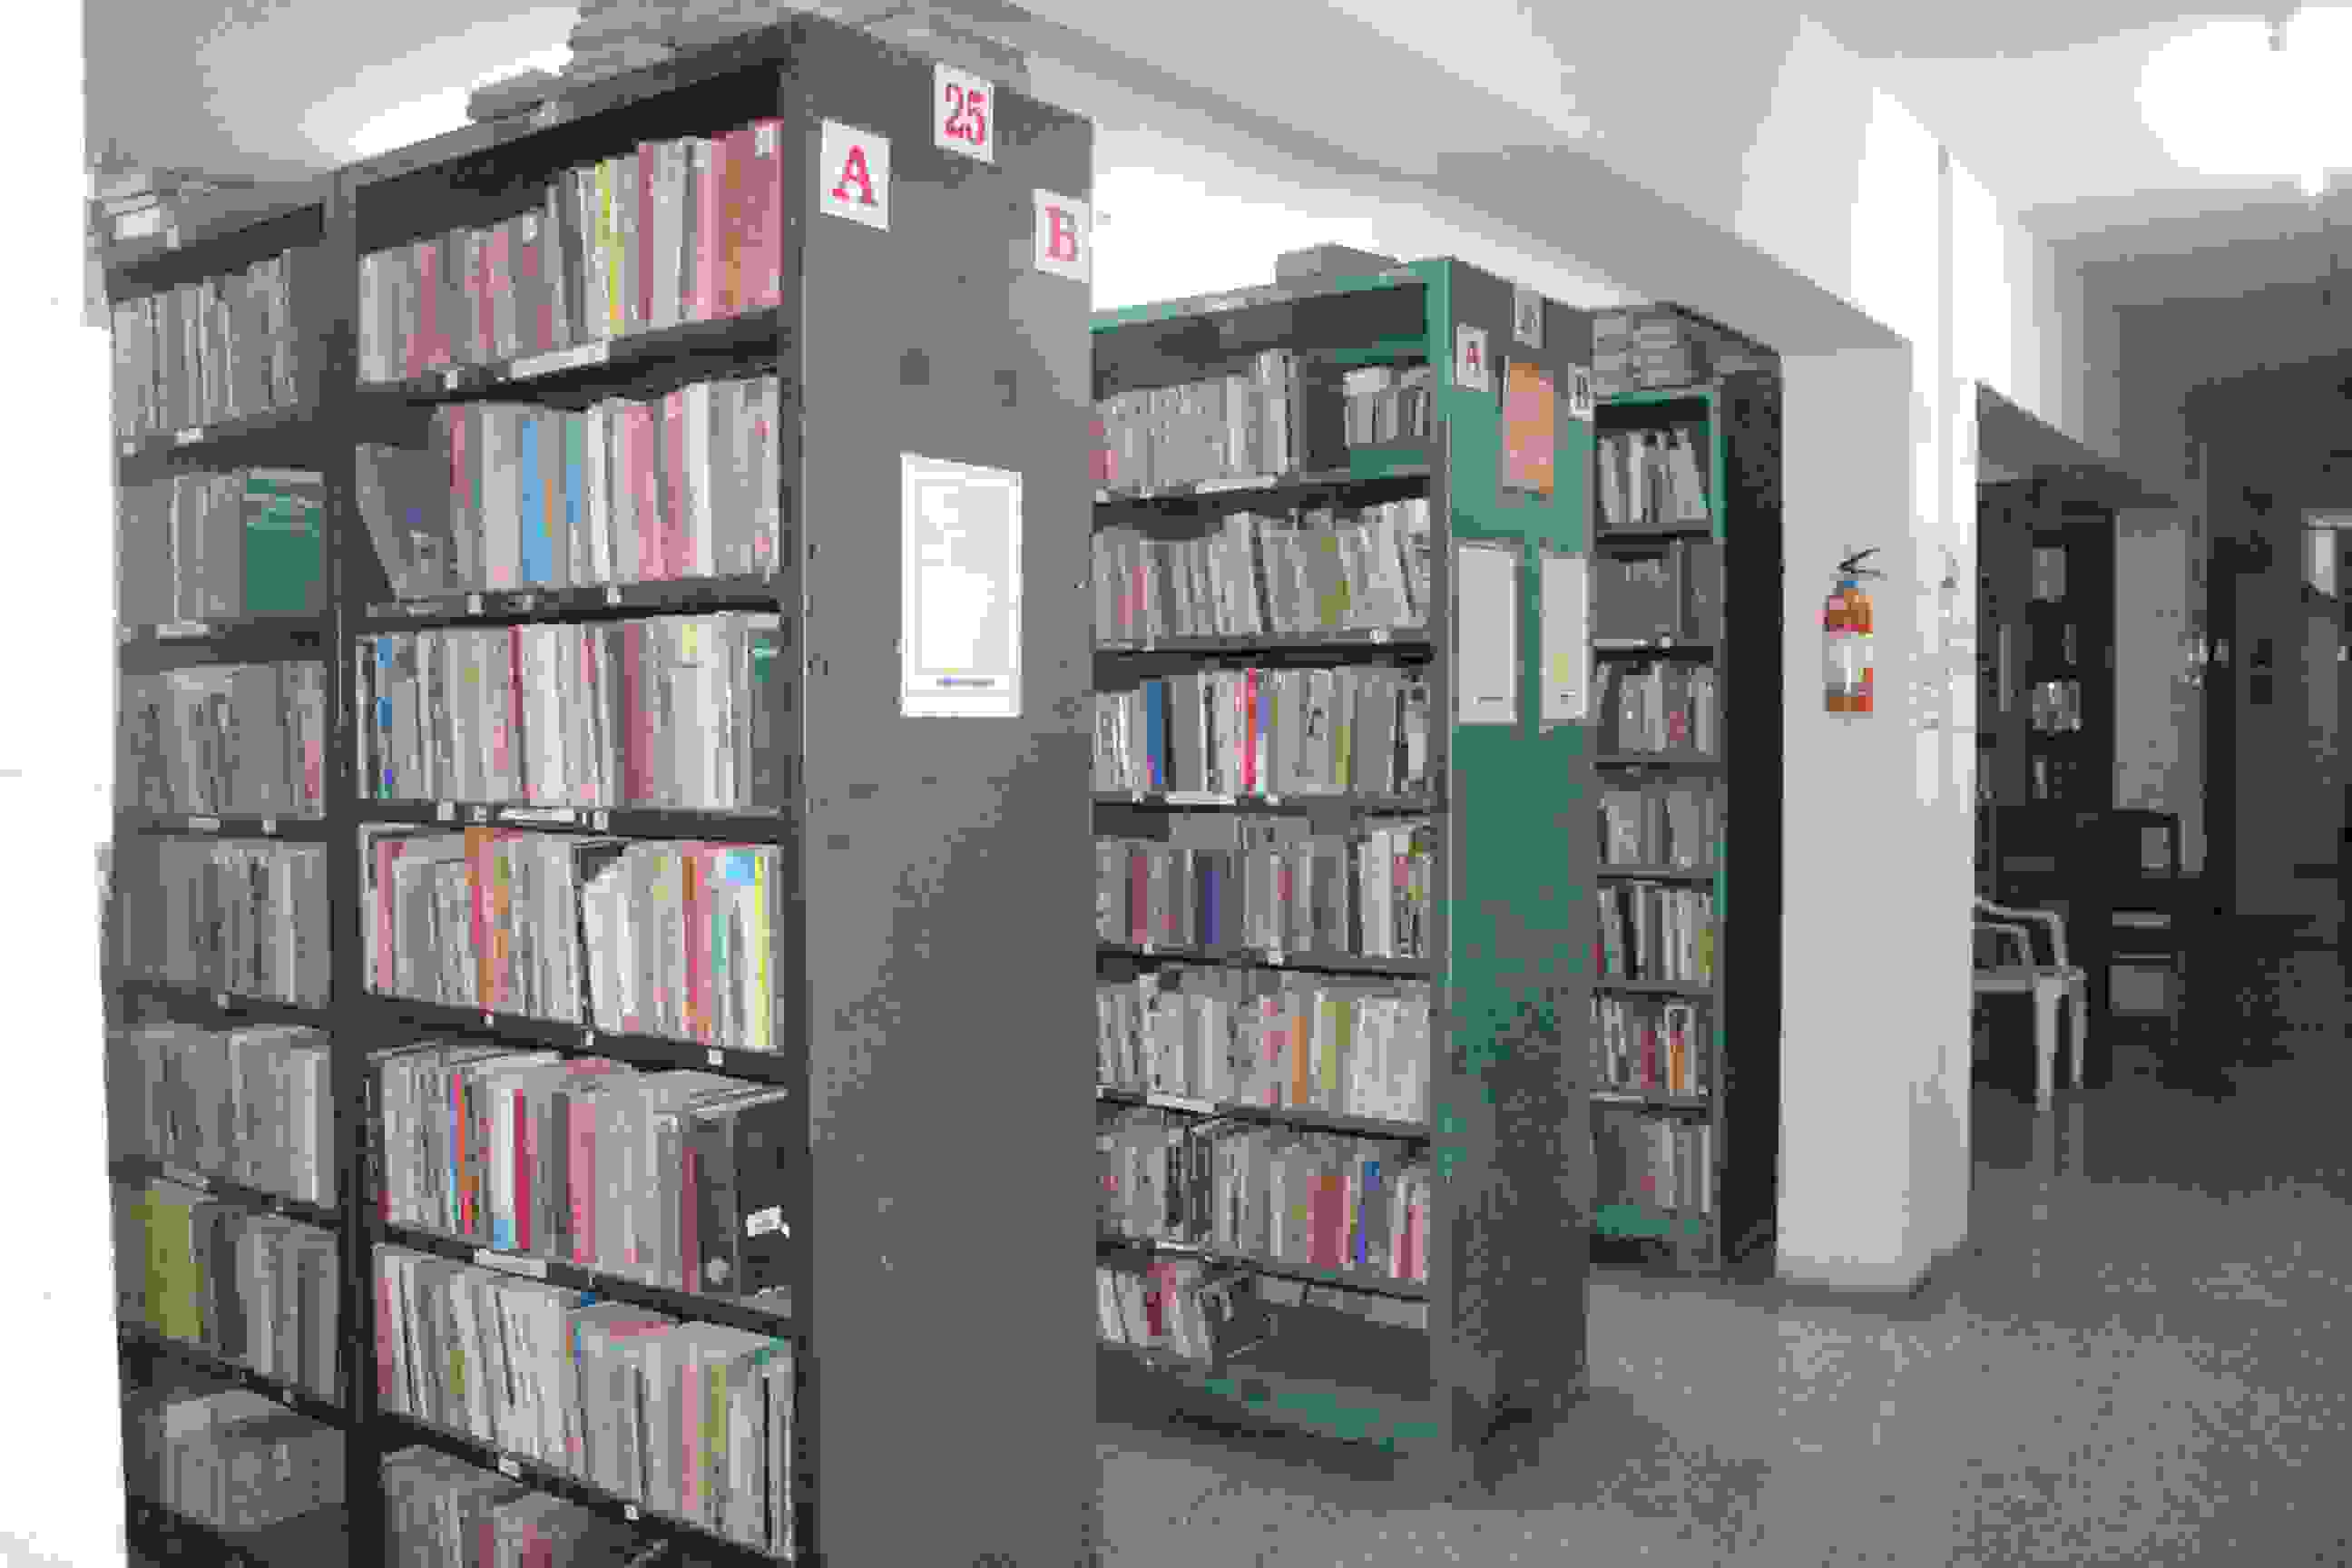 Inflibnet Library